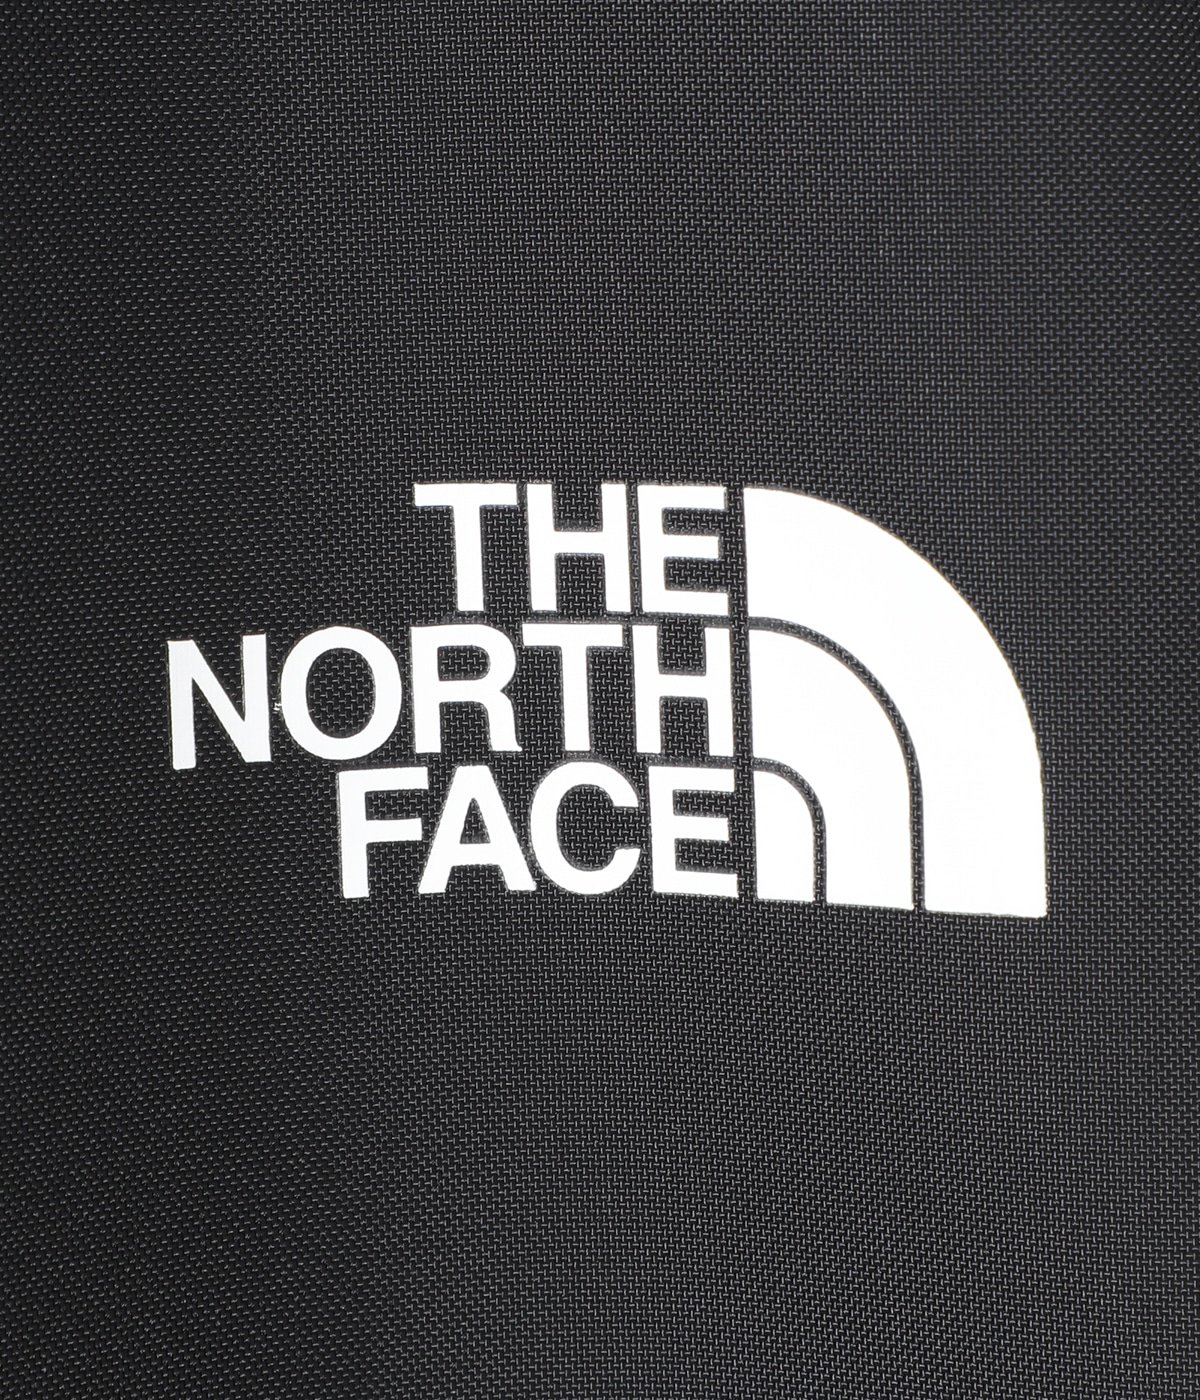 NEVER STOP ING The Coach Jacket   THE NORTH FACEザ ノースフェイス